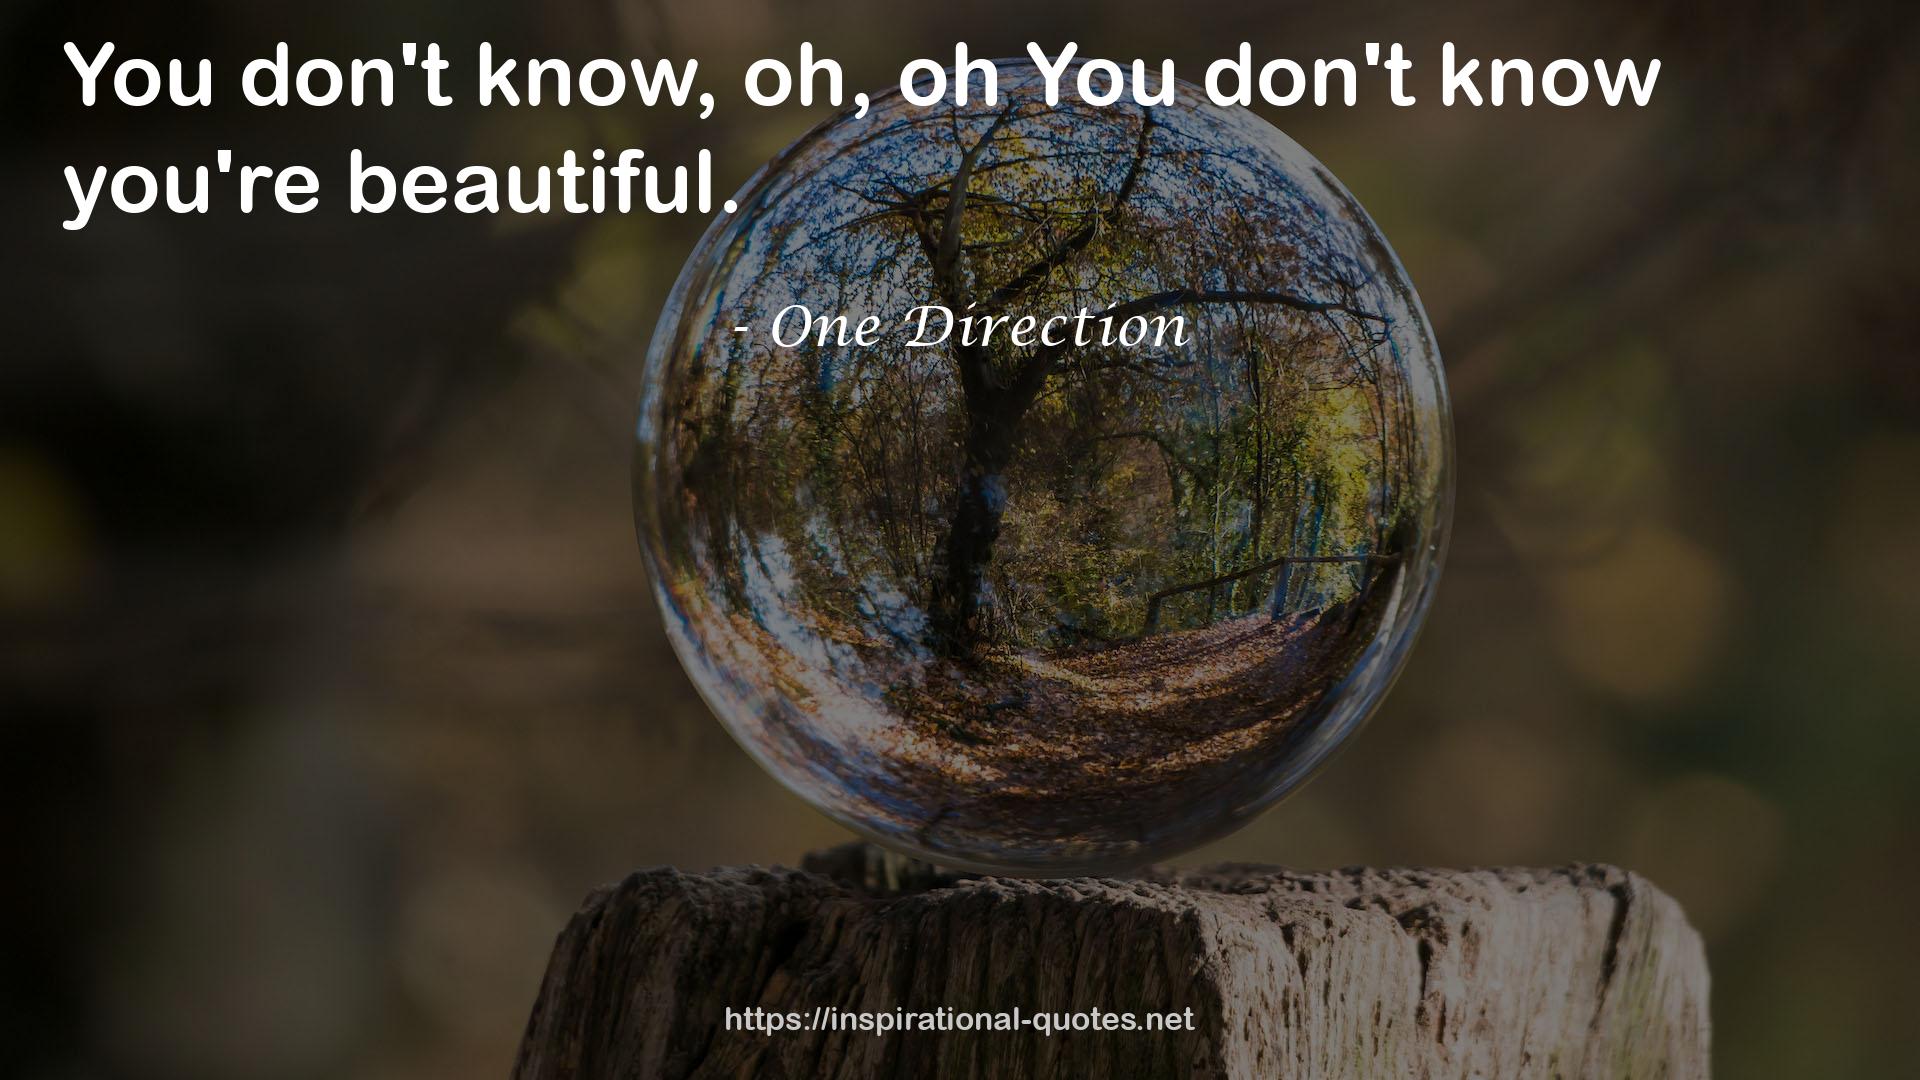 One Direction QUOTES